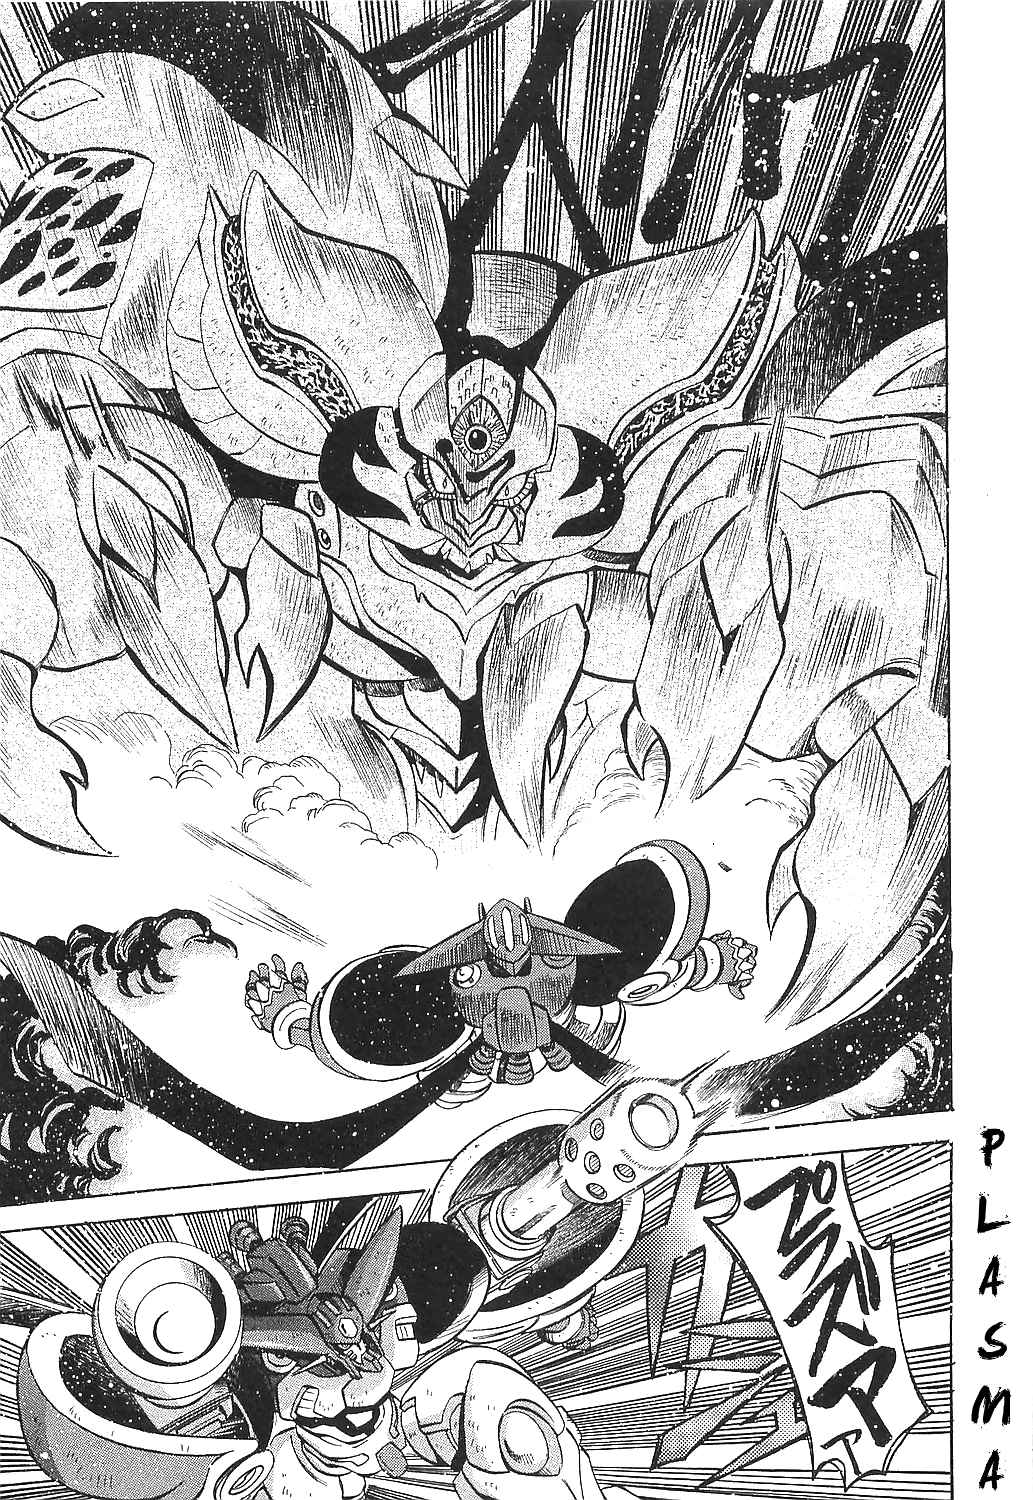 Getter Robo Hien ~THE EARTH SUICIDE~ Vol. 3 Ch. 17 End of the Journey